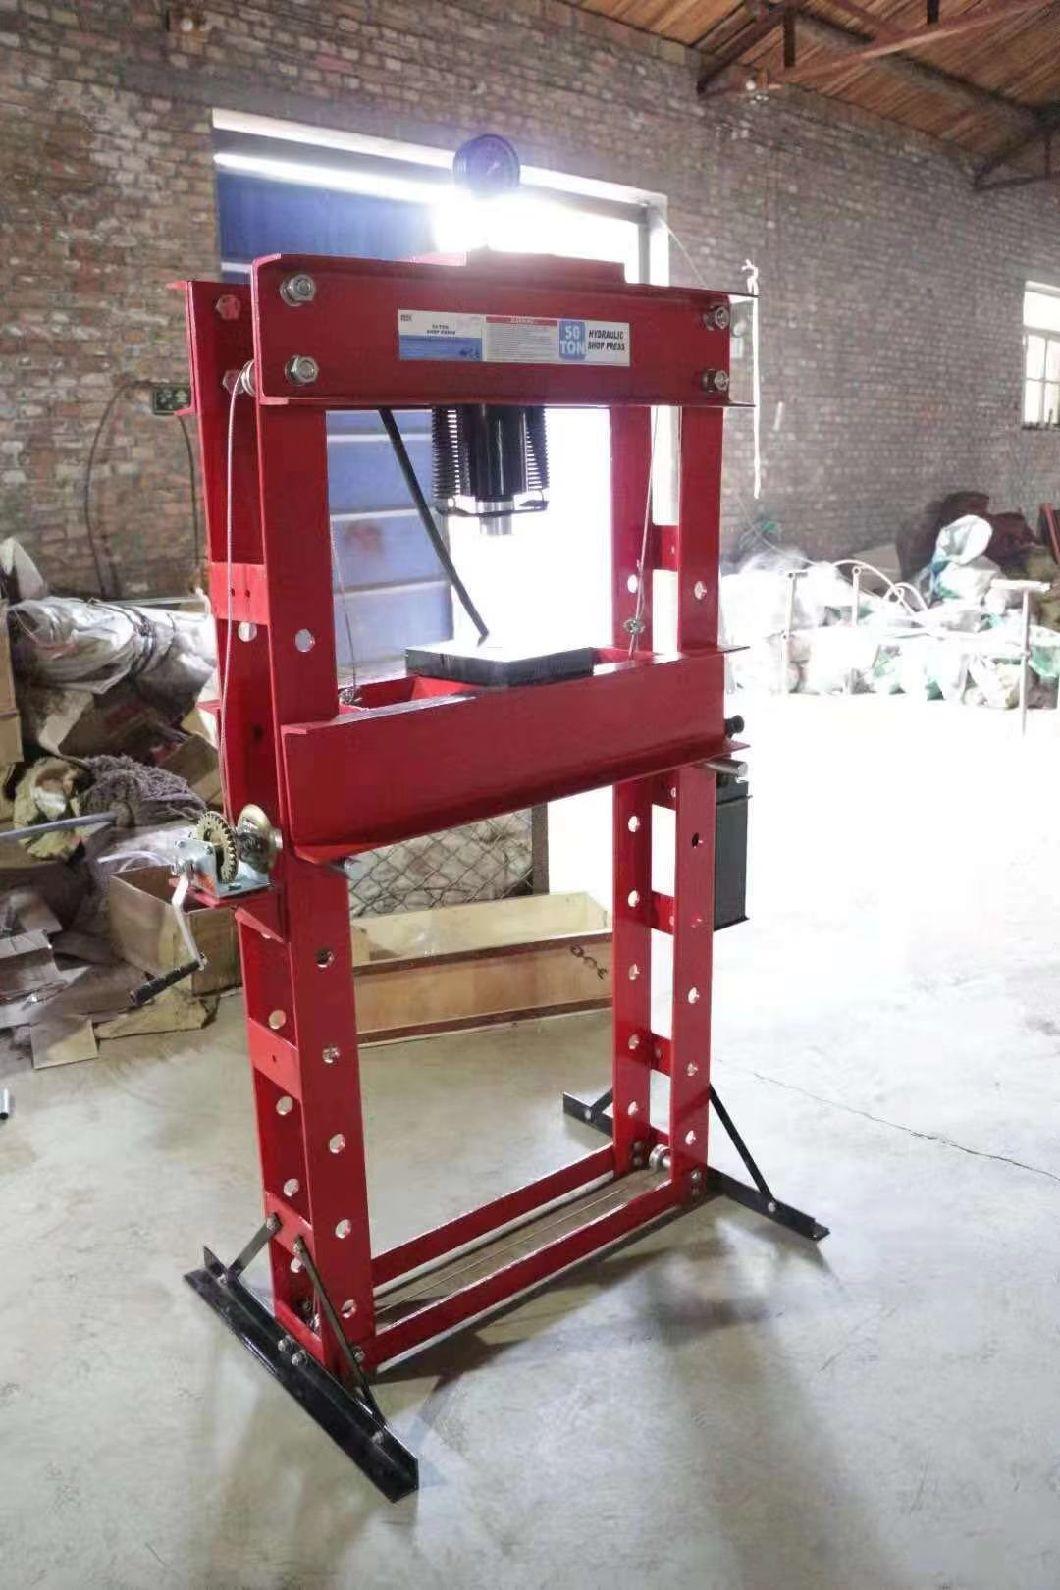 Garage Repaired Tools 10t Hydraulic Shop Press with Safety Guard